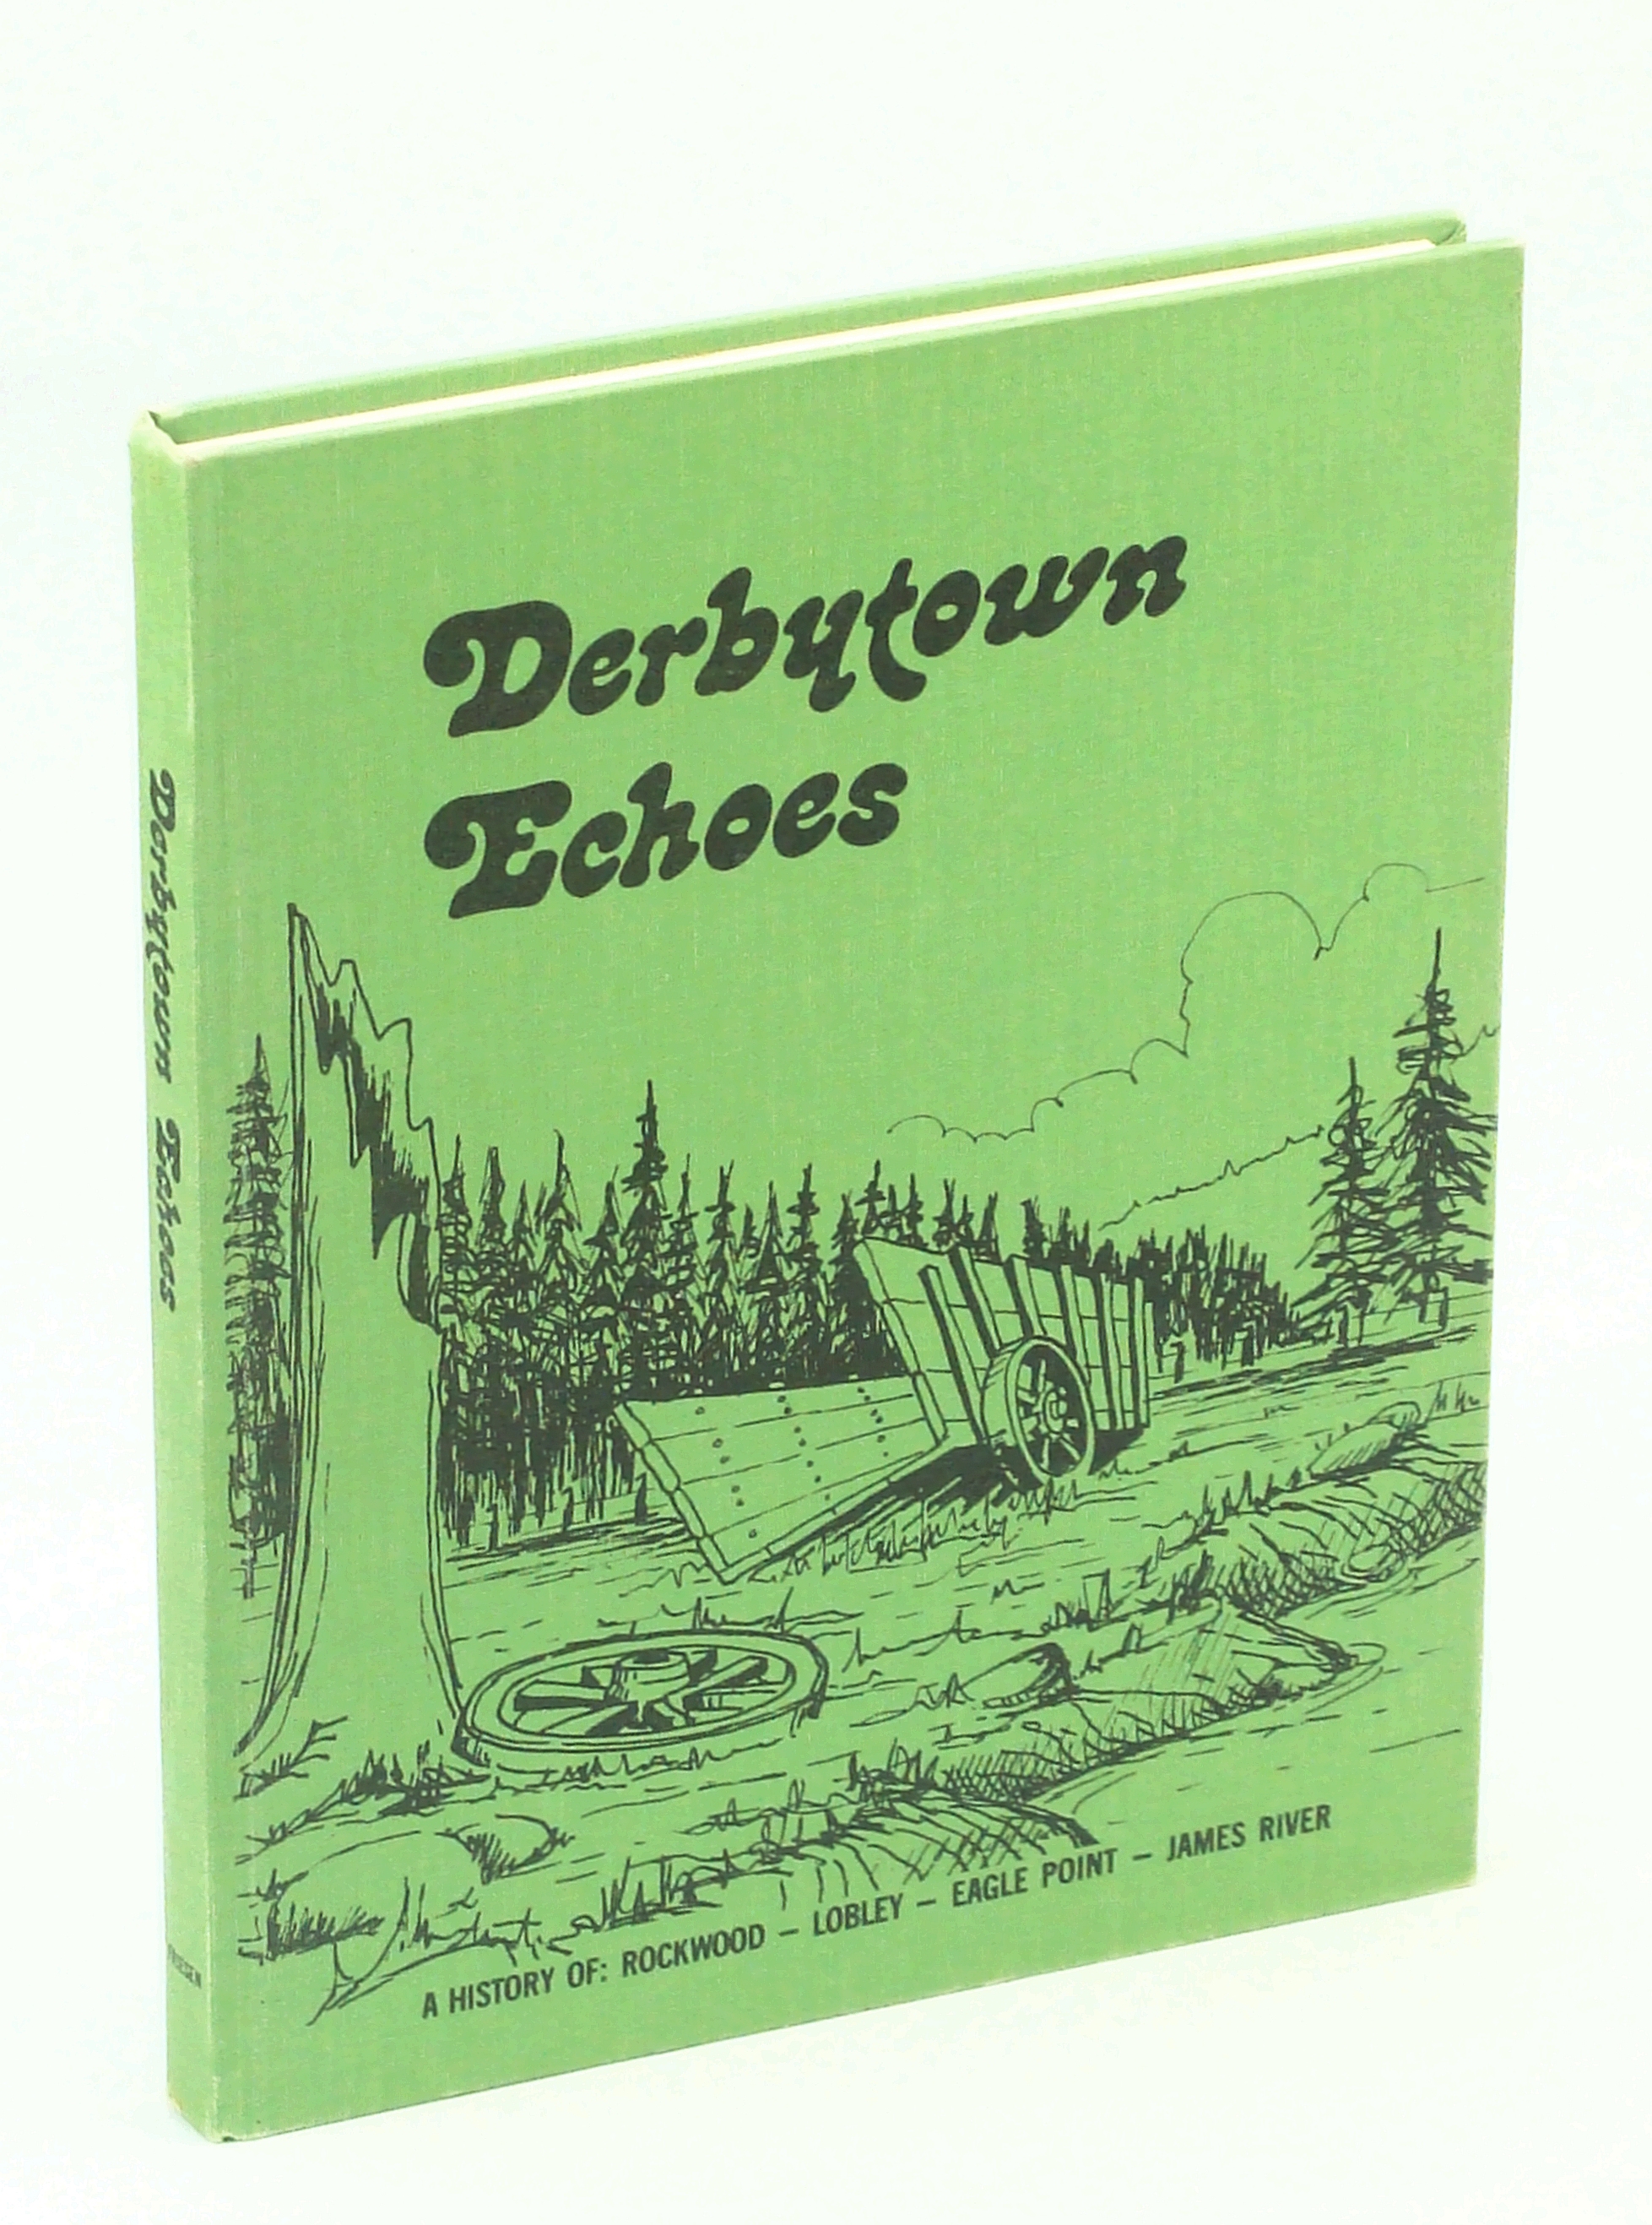 Image for Derbytown Echoes - A History of Rockwood, Lobley, Eagle Point, James River [Alberta Local History]